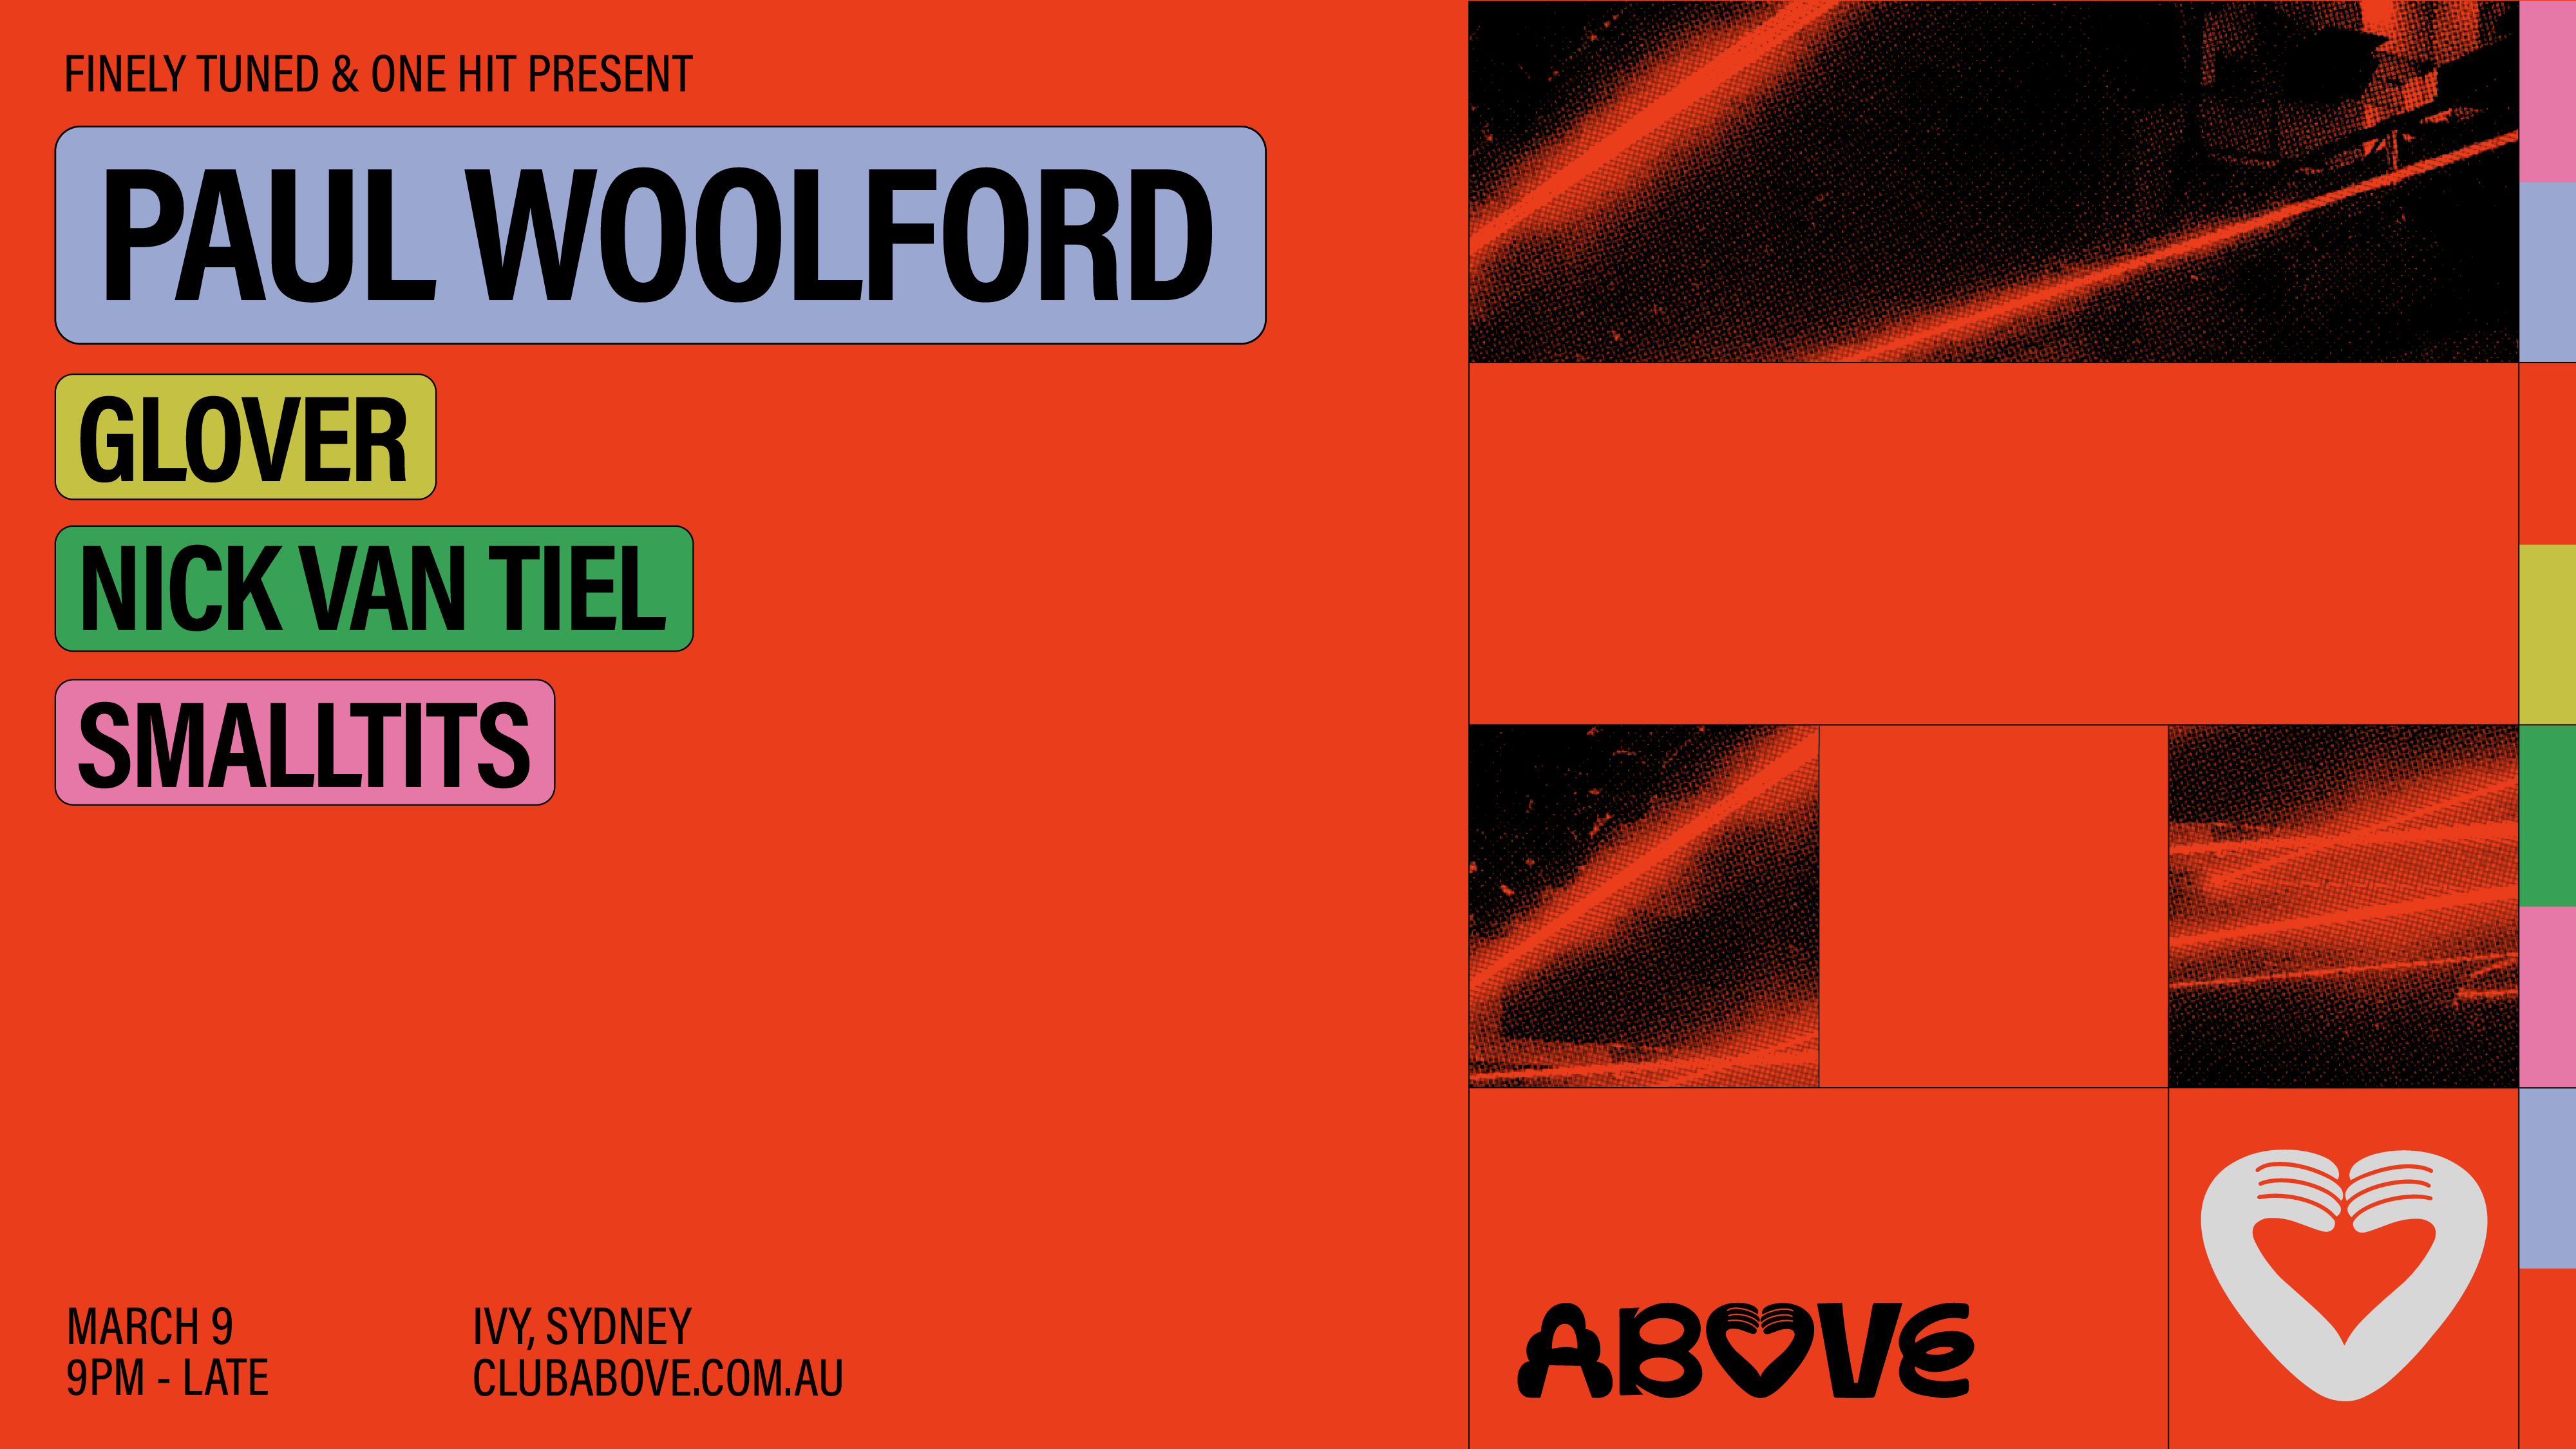 Above — March 9 feat. Paul Woolford (UK) - フライヤー表